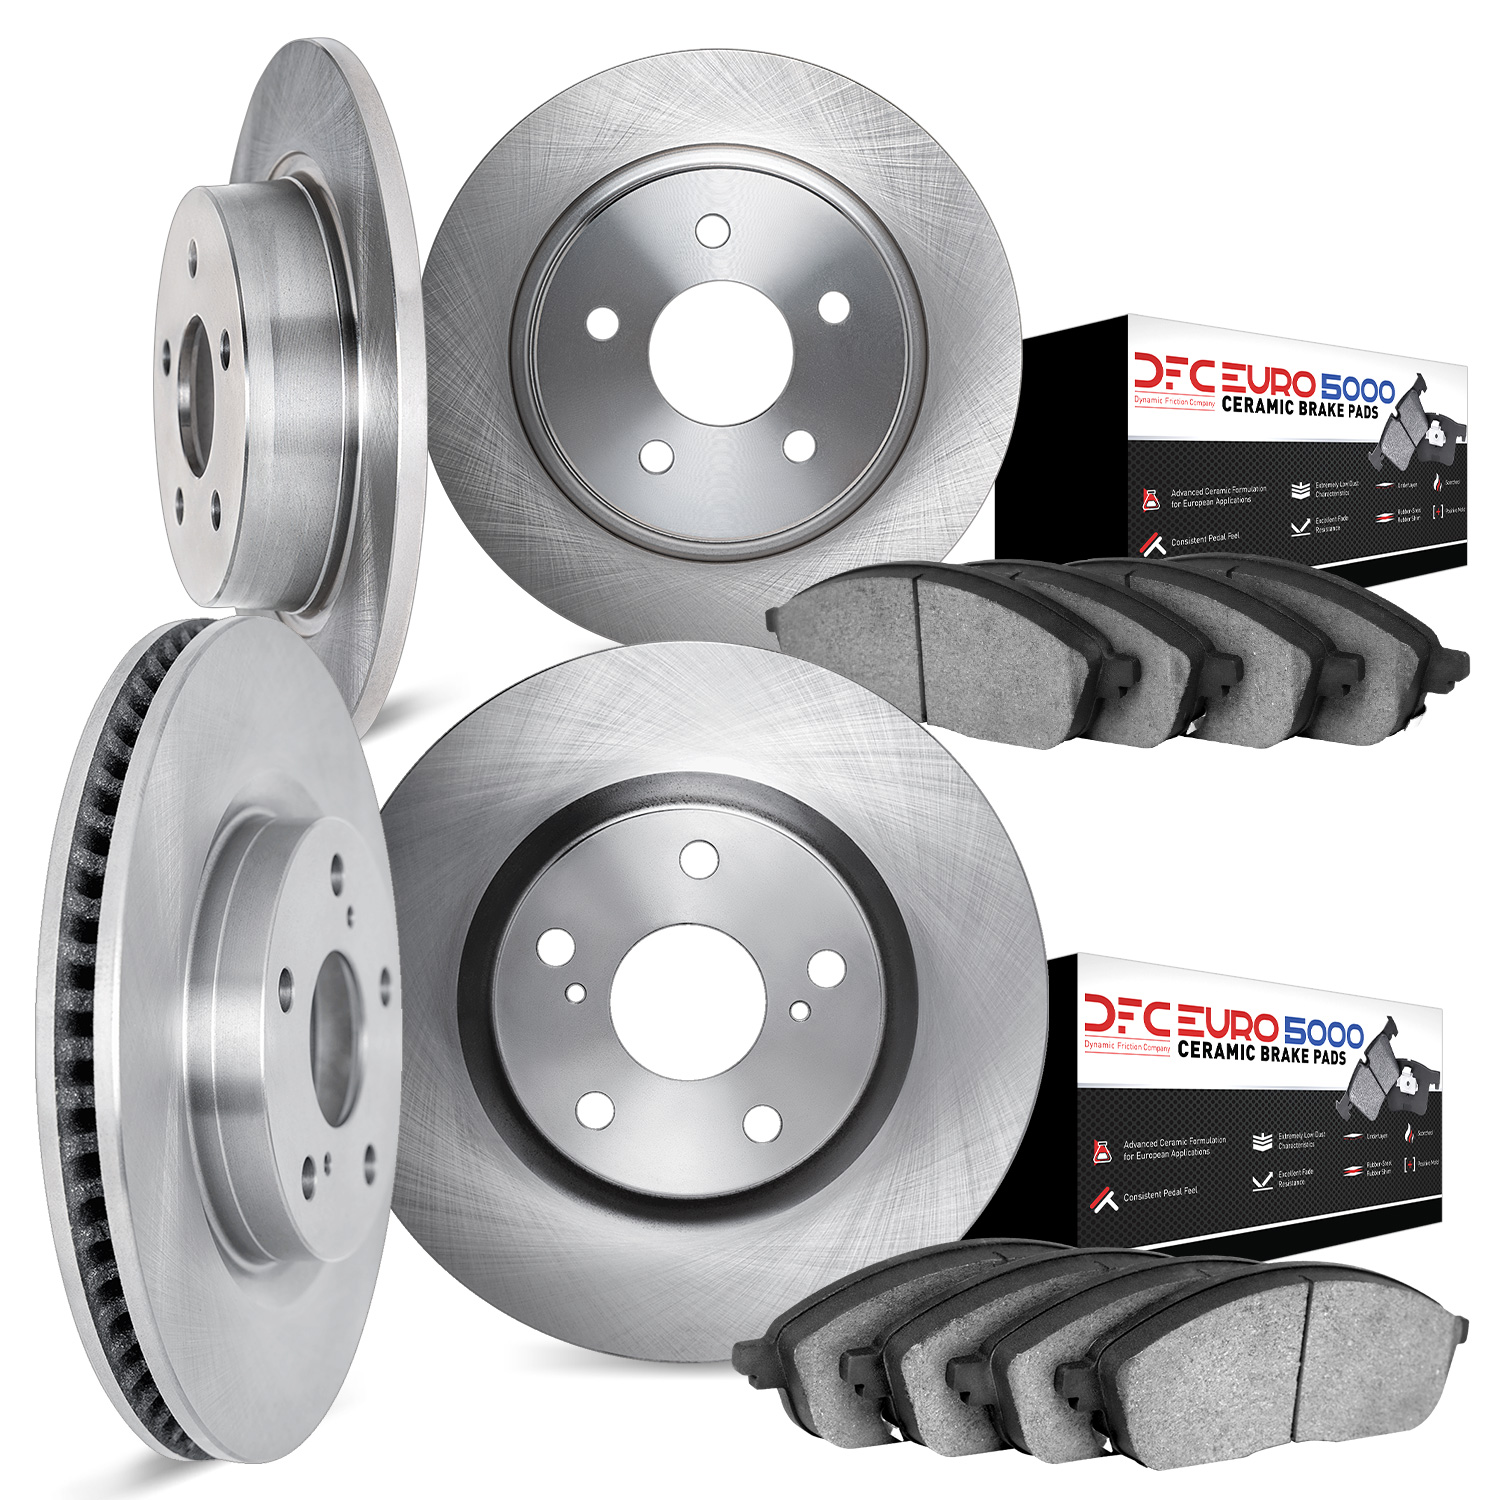 6604-63005 Brake Rotors w/5000 Euro Ceramic Brake Pads, 1970-1972 Mercedes-Benz, Position: Front and Rear